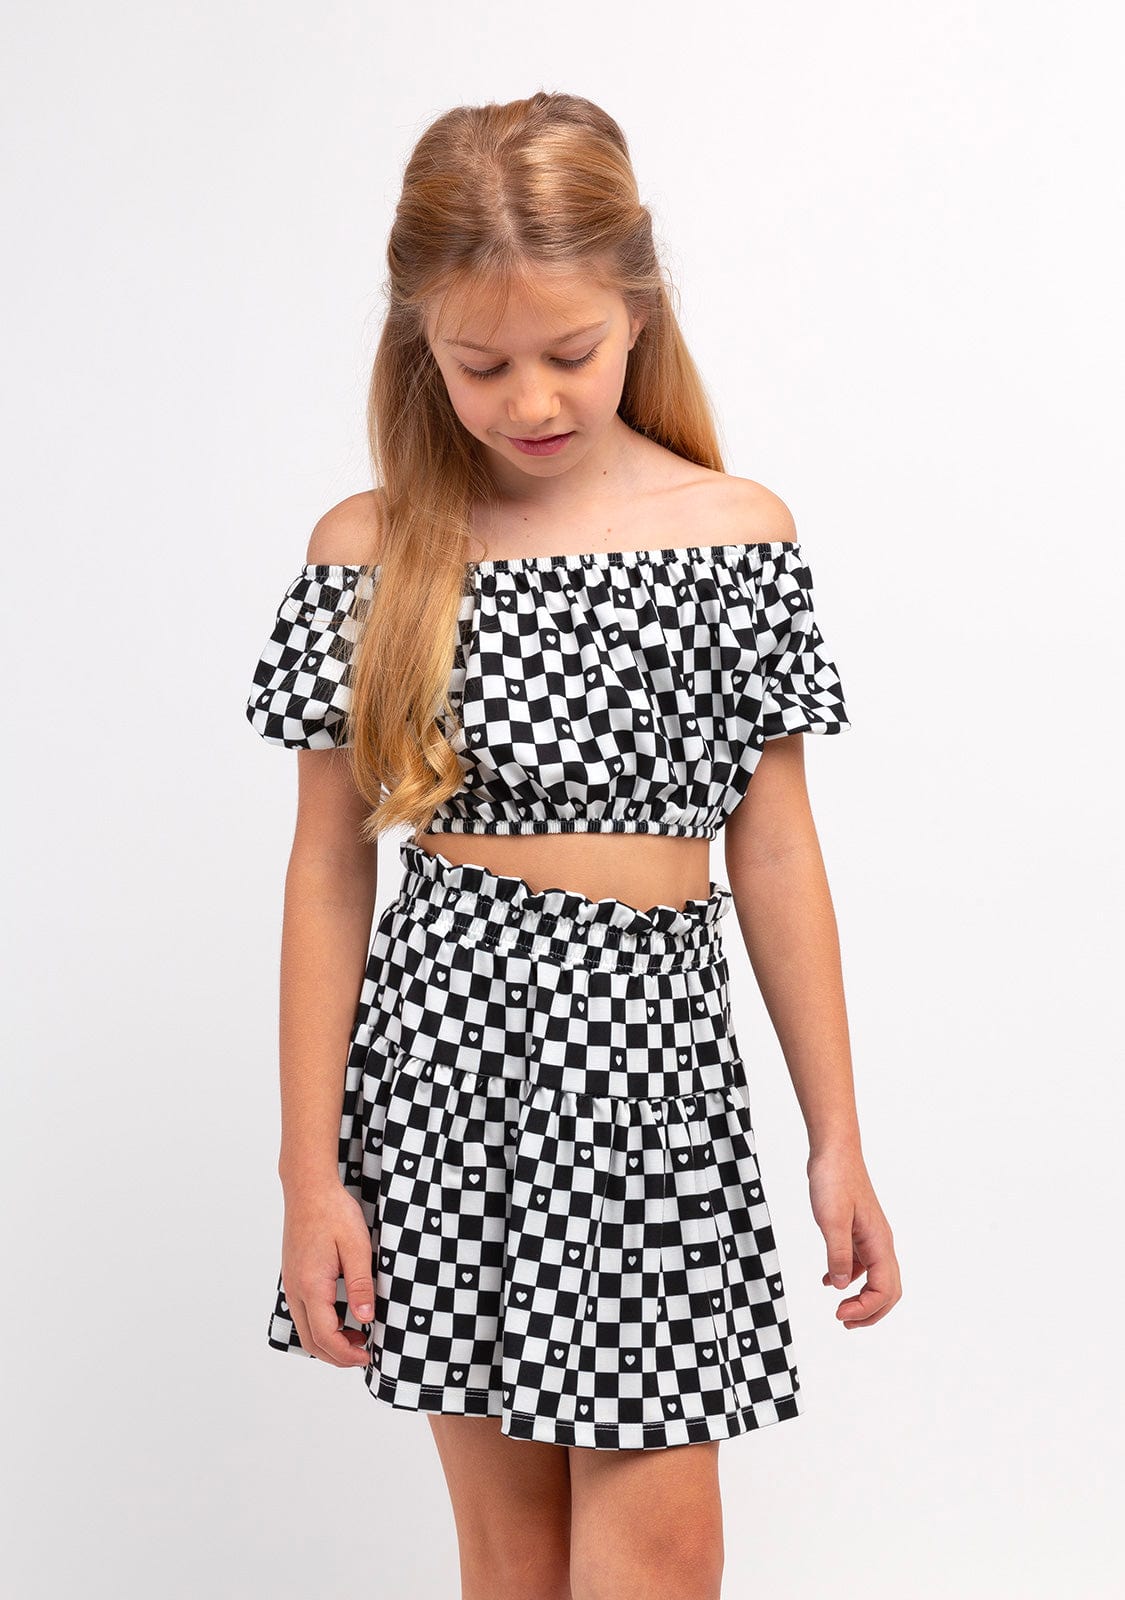 CONGUITOS TEXTIL Clothing Girl's Black Checkerboard Skirt